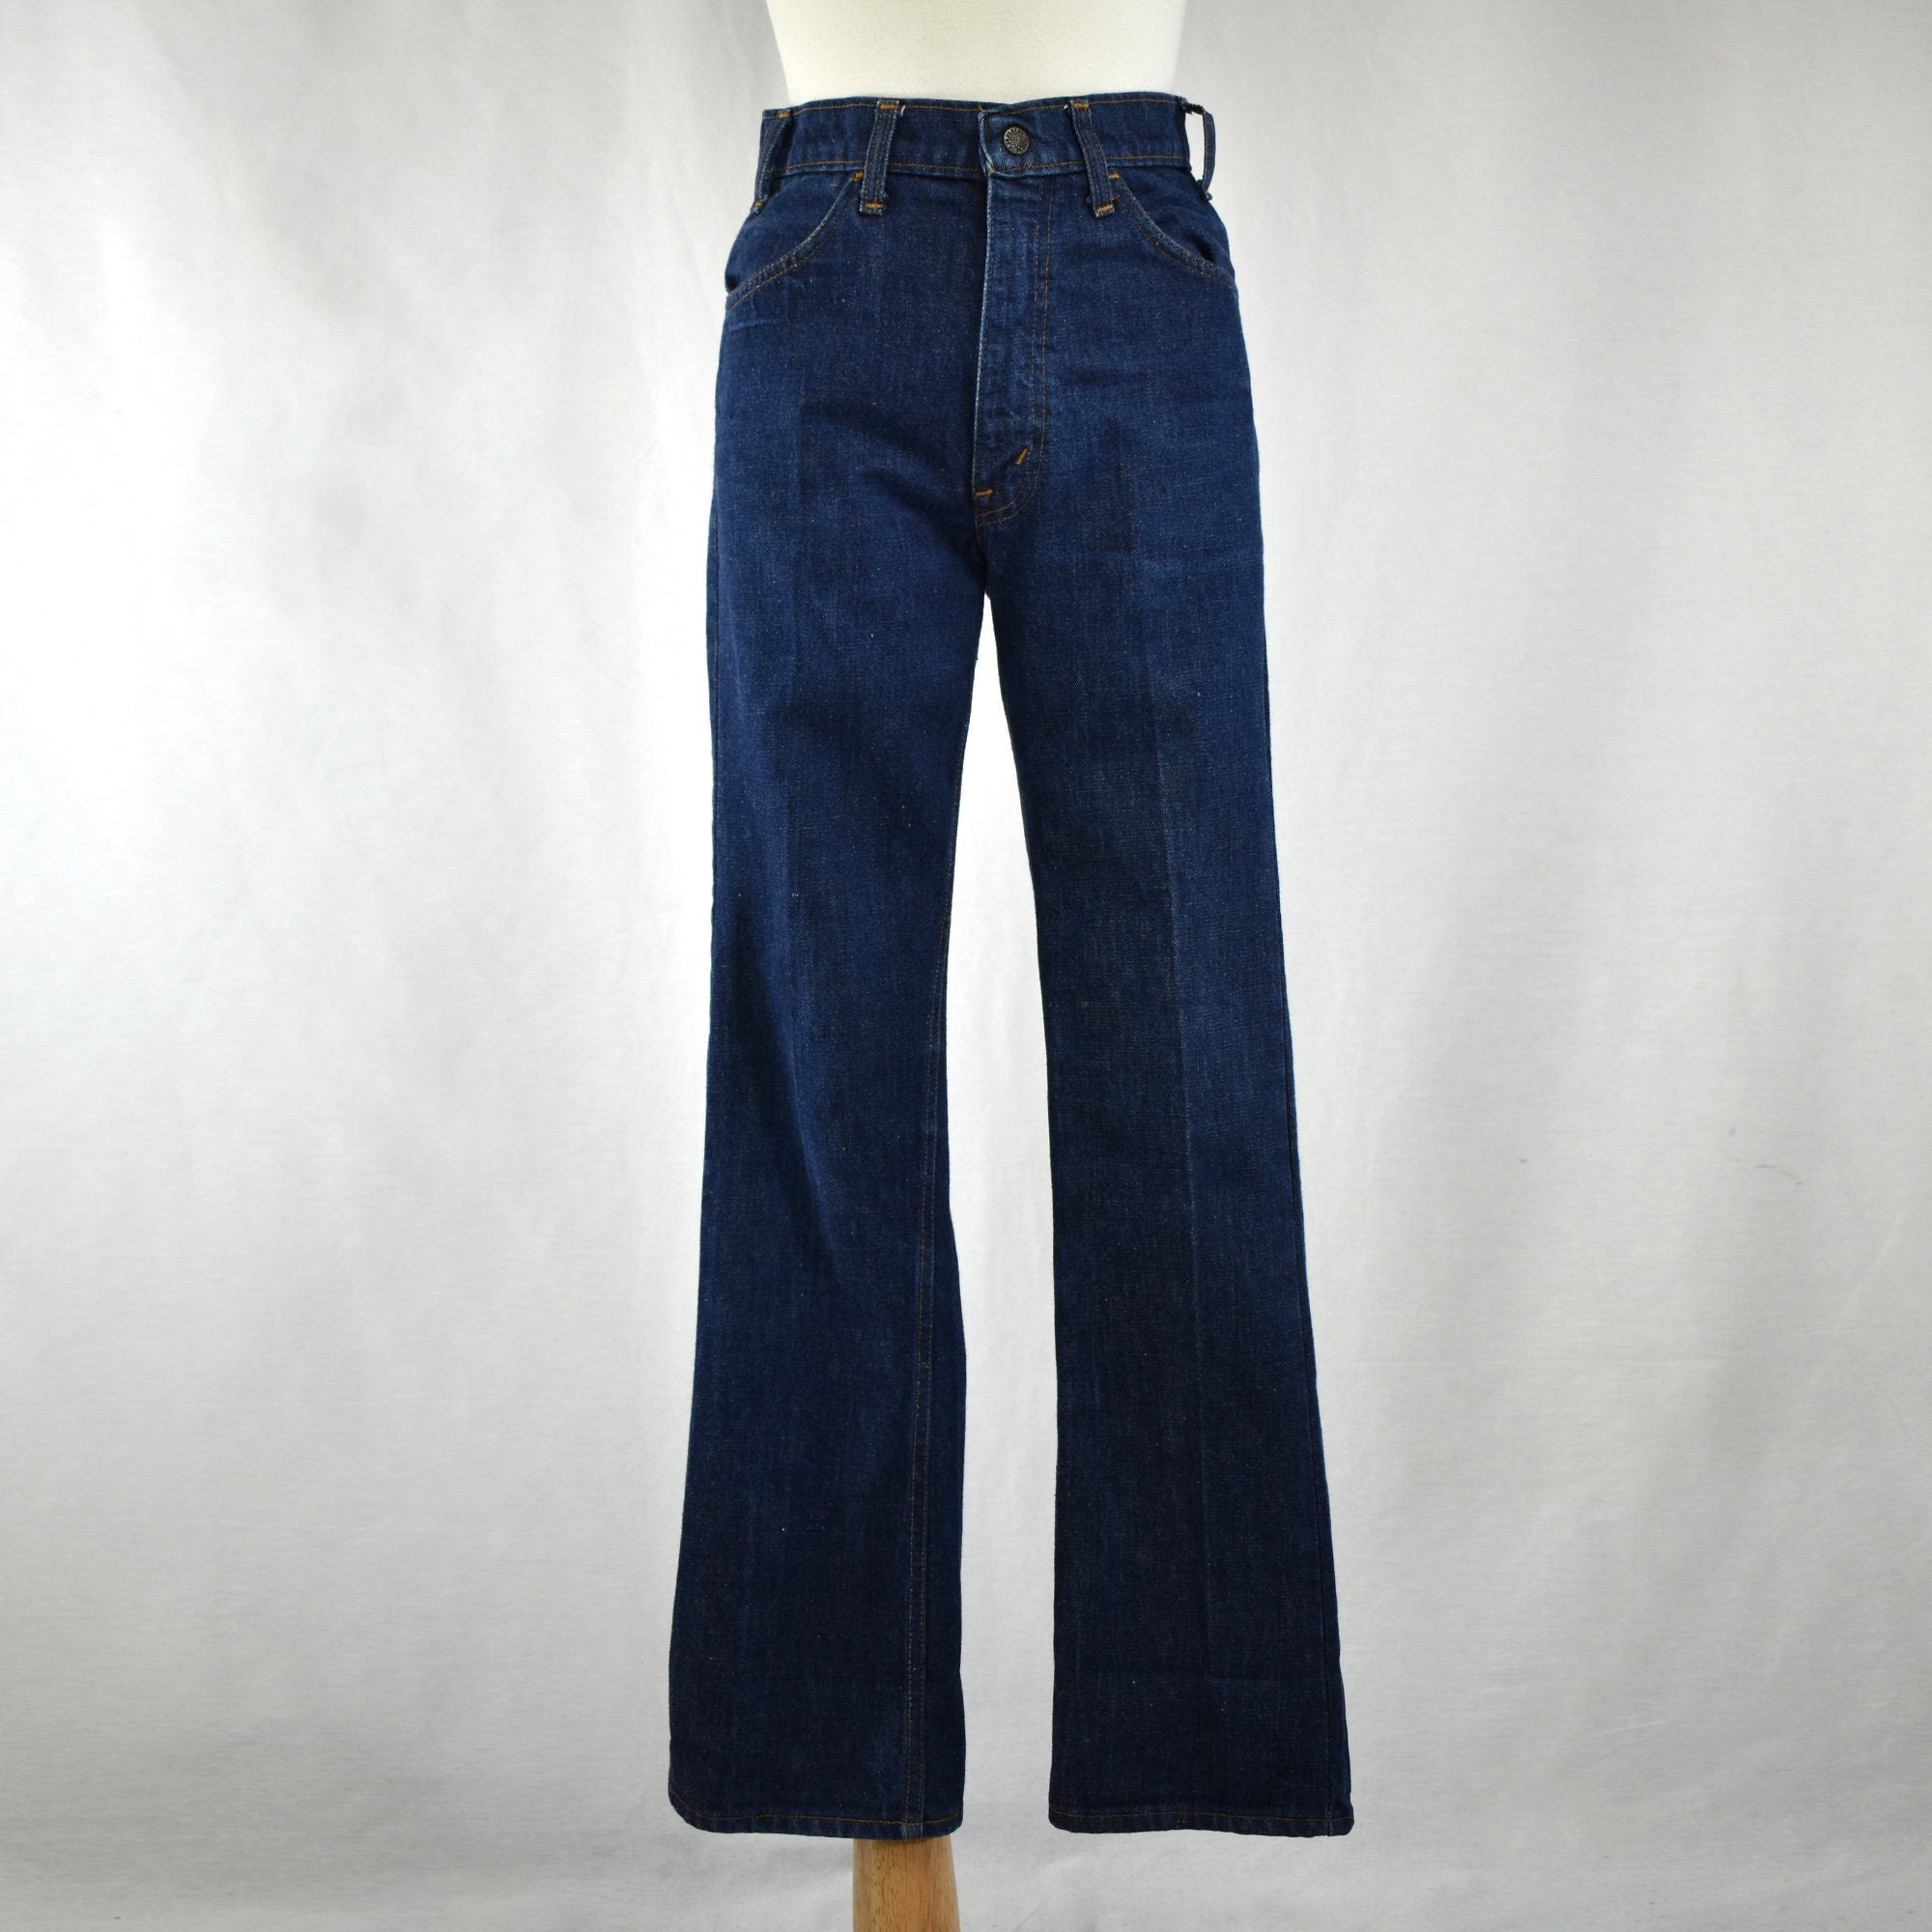 Vintage 70s Jeans, Super High Waisted, MONTGOMERY WARD